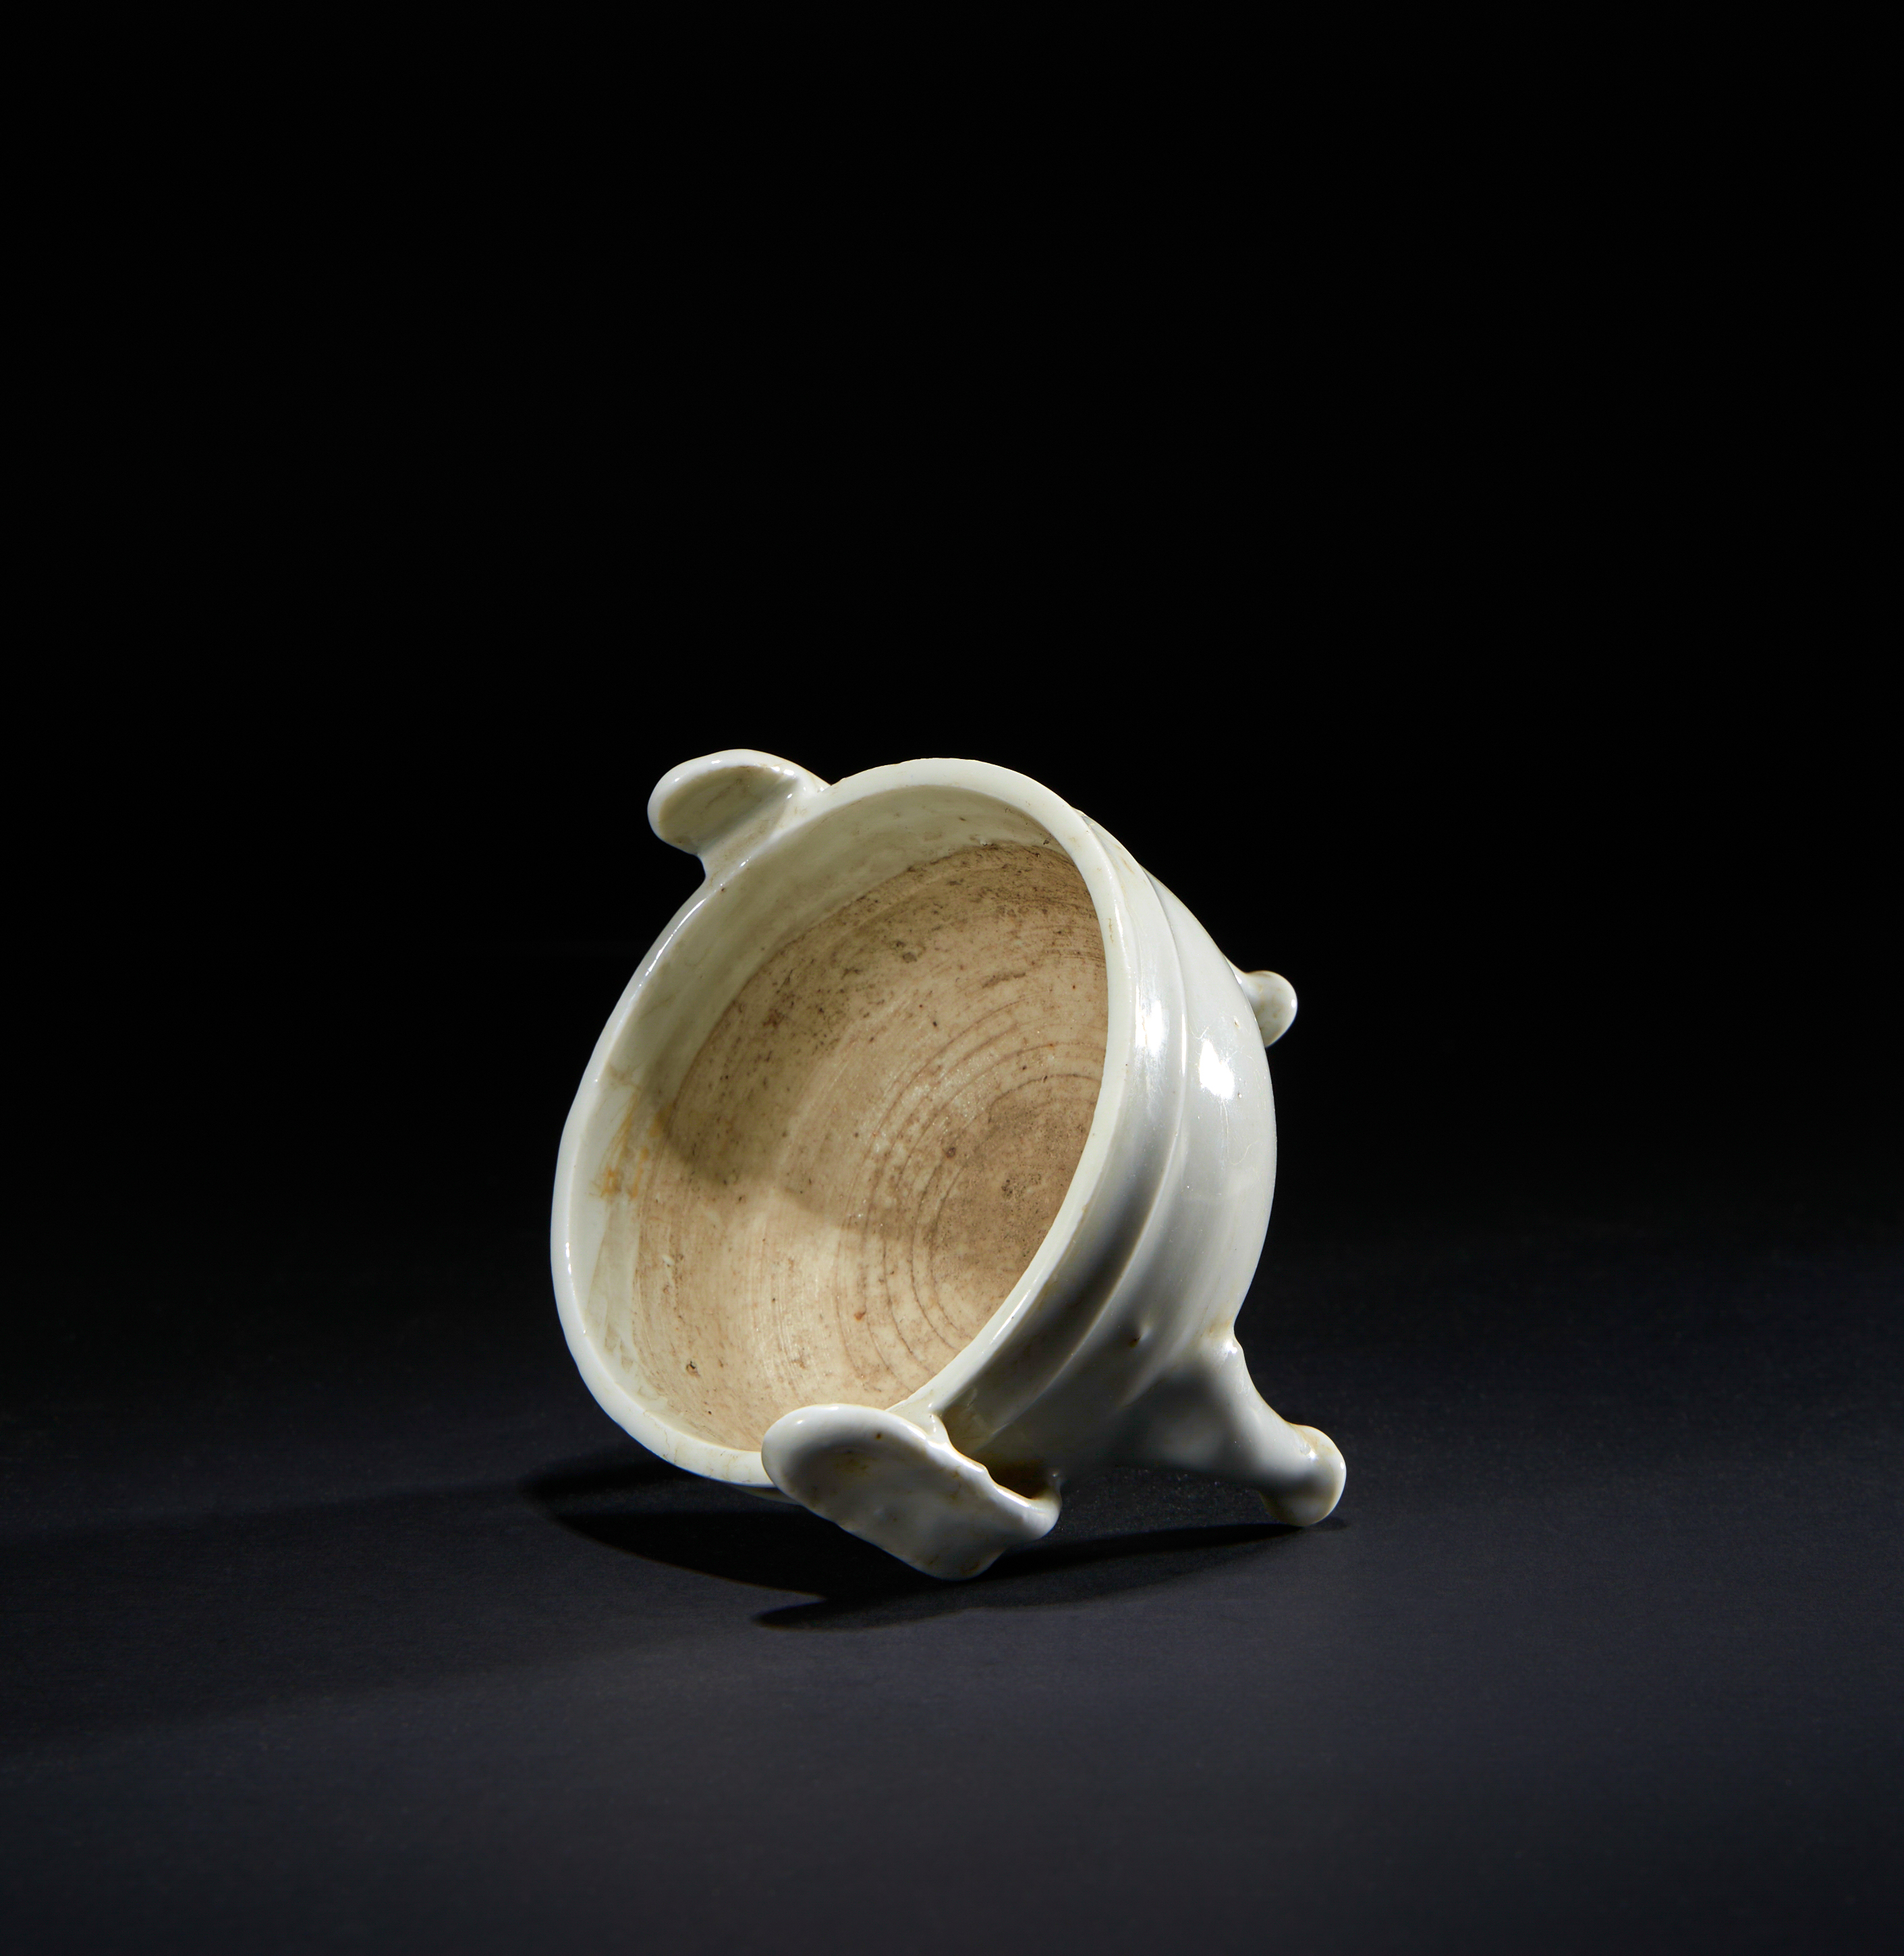 AN UNUSUAL WHITE-GLAZED TRIPOD CENSER, YUAN/EARLY MING, 14TH/15TH CENTURY - Image 3 of 3